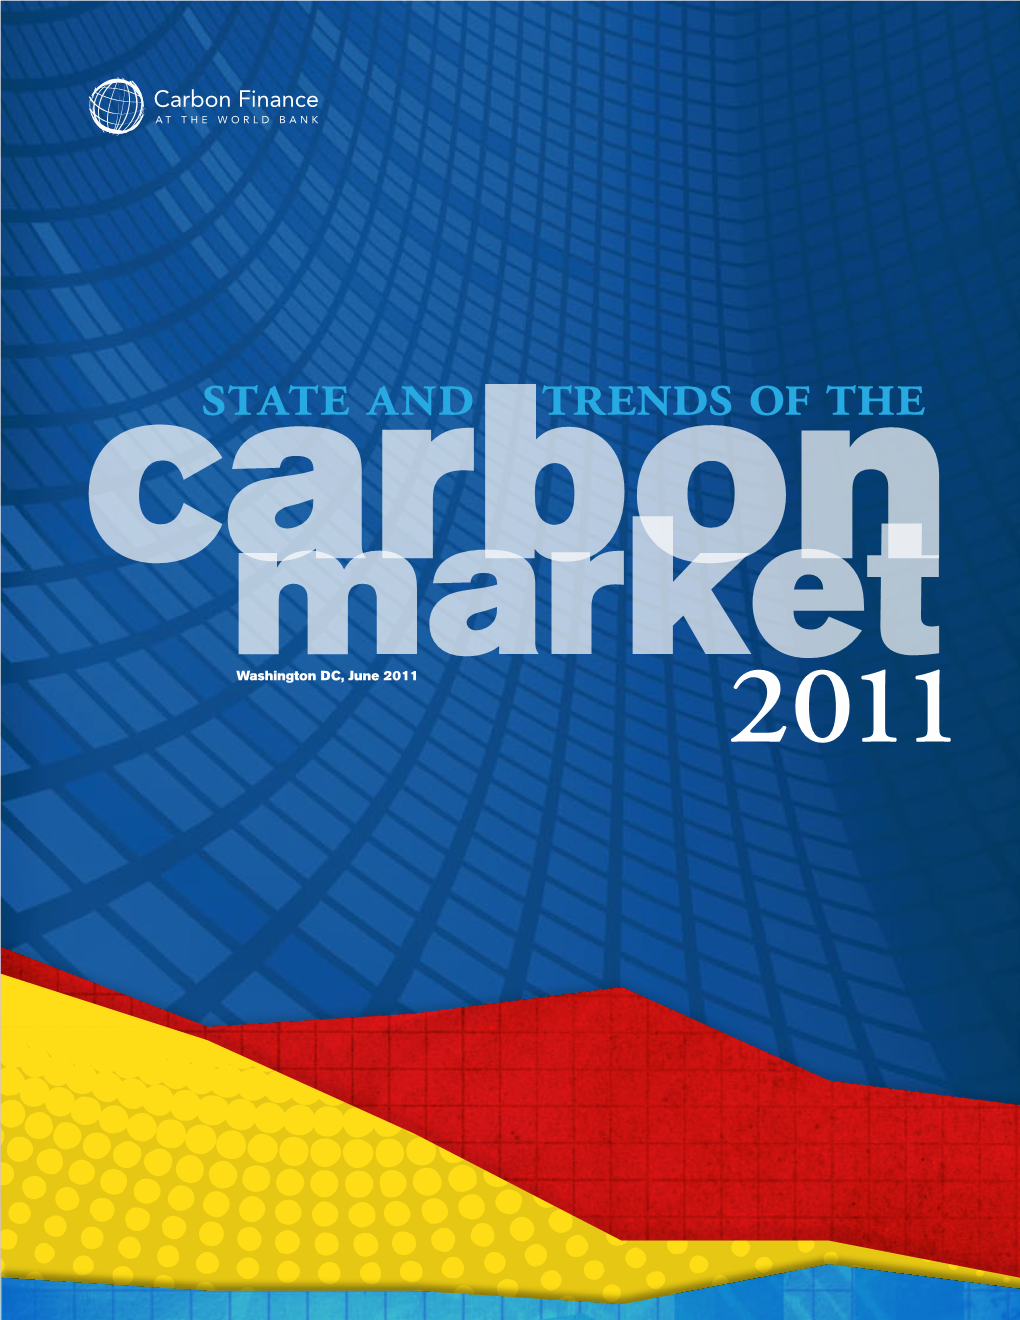 State and Trends of the Carbon Market 2011